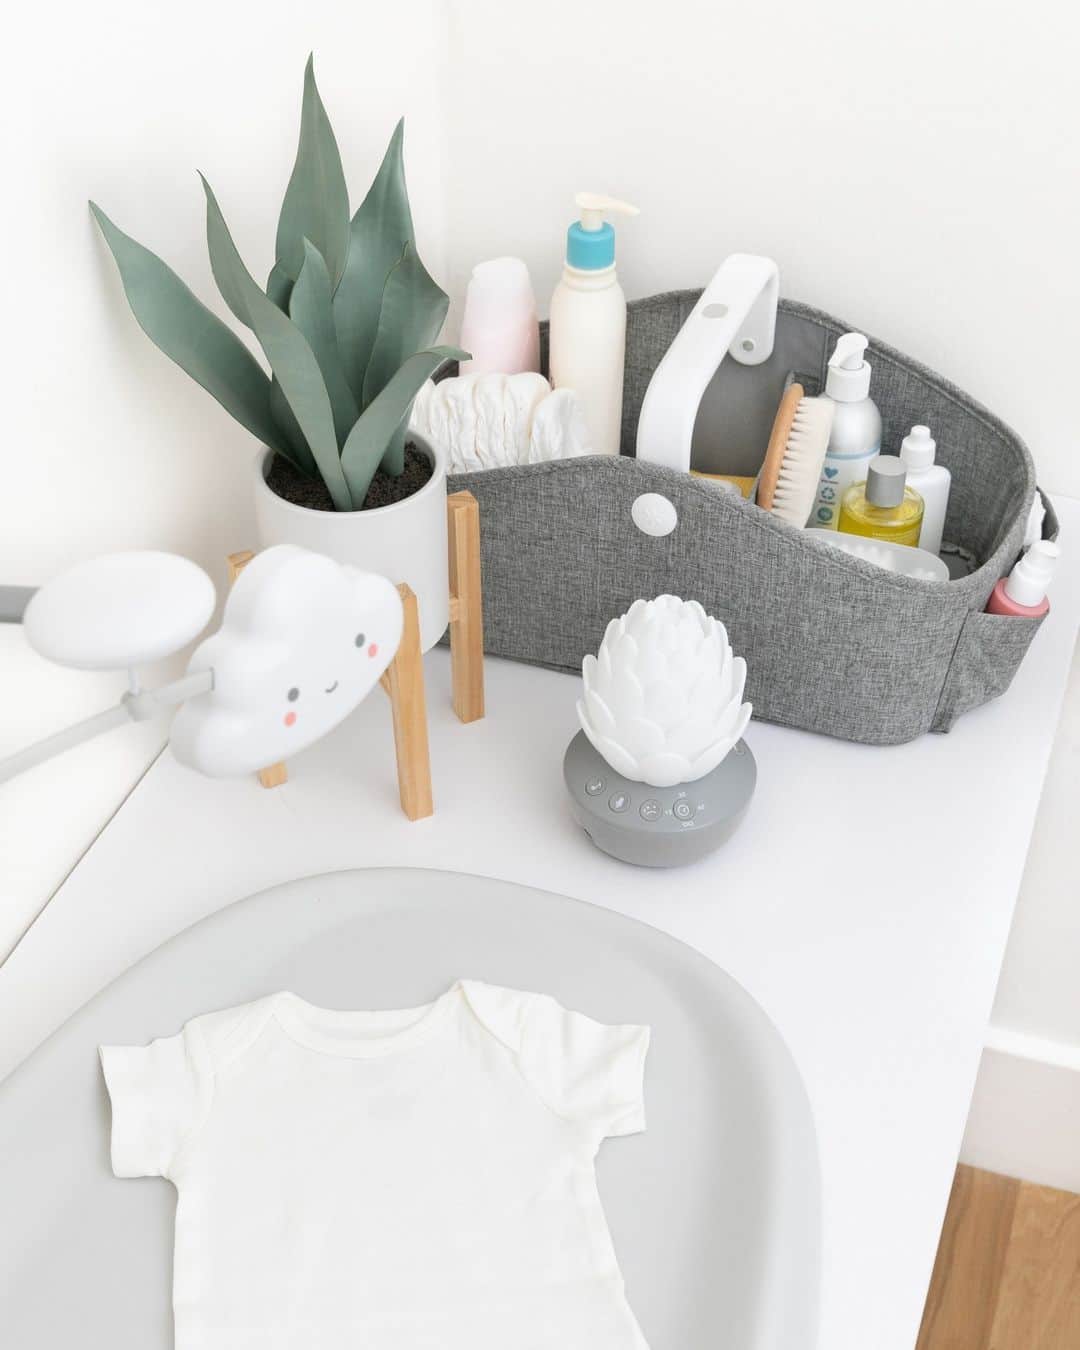 Skip Hopのインスタグラム：「Calling all parents-to-be! ☎️ Have you added our top registry must-haves to you list? 📝 Check out our stories for baby gear go-tos every new parent wants (and needs) ASAP!   #skiphop #musthavesmadebetter #nursery #babyregistry #registrymusthaves #newparent #babygear #changingtable #nurserygear」